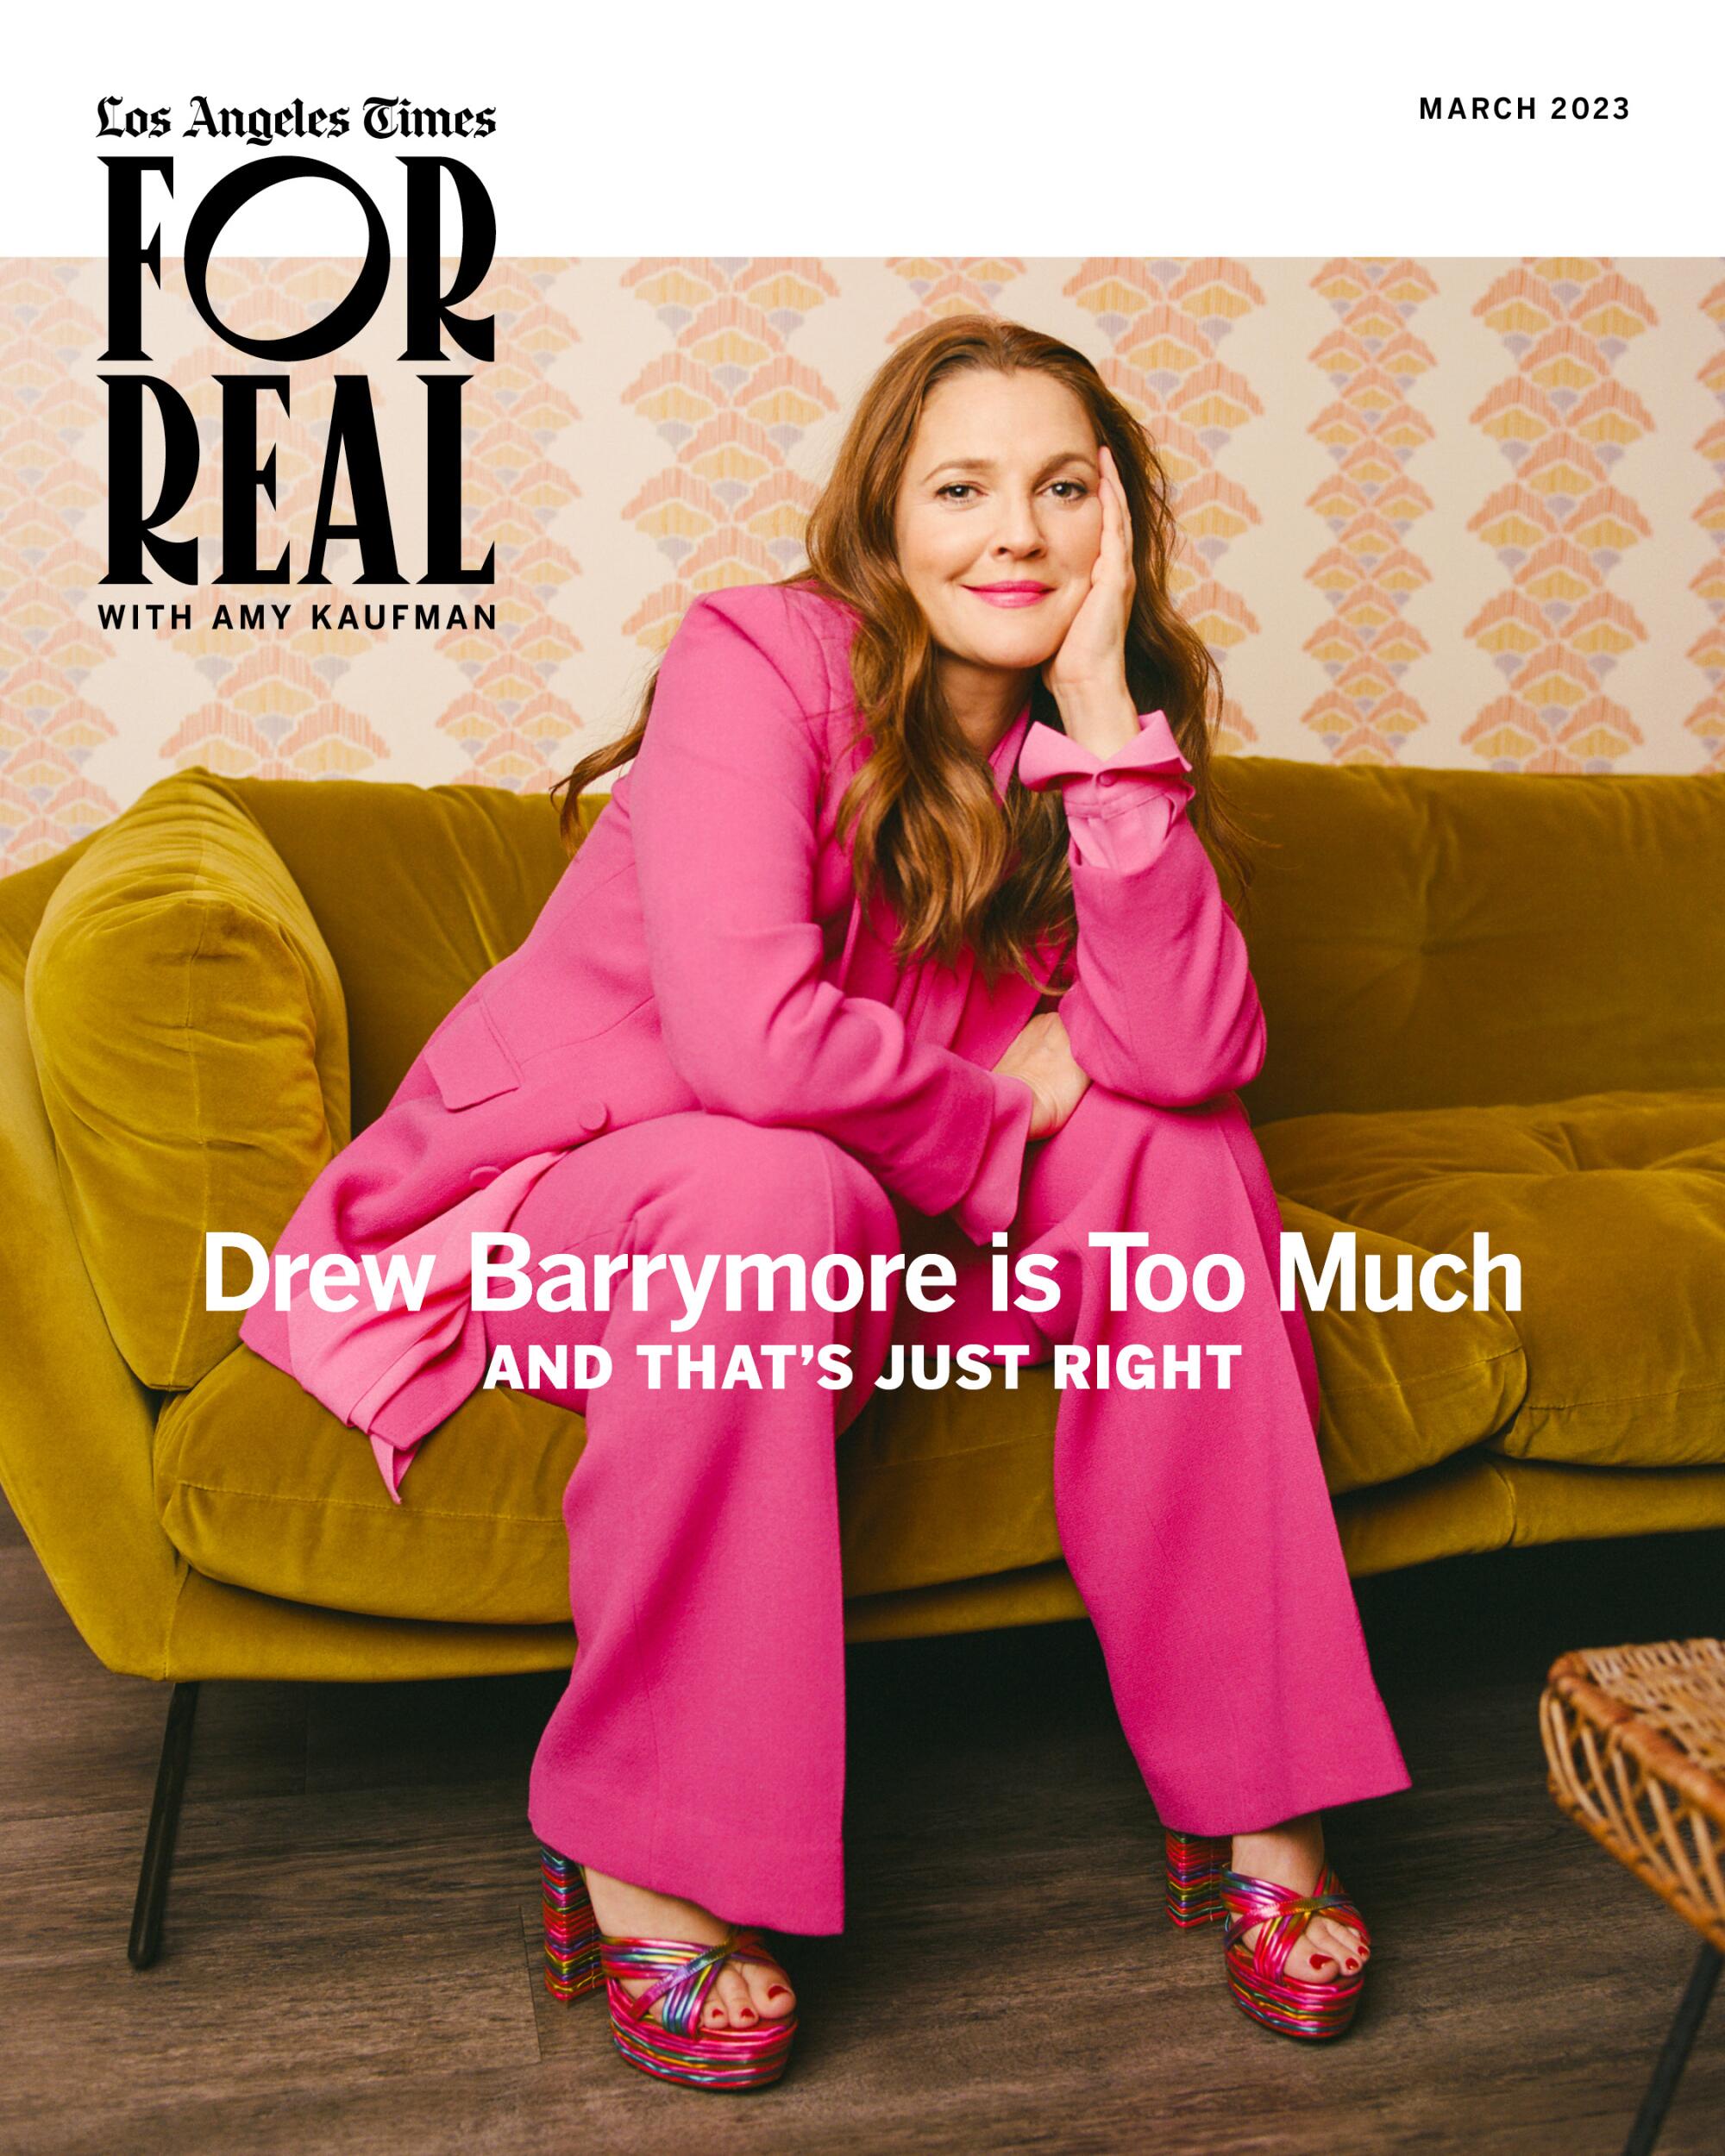 Why Women Everywhere Love Drew Barrymore's Beauty & Home Lines